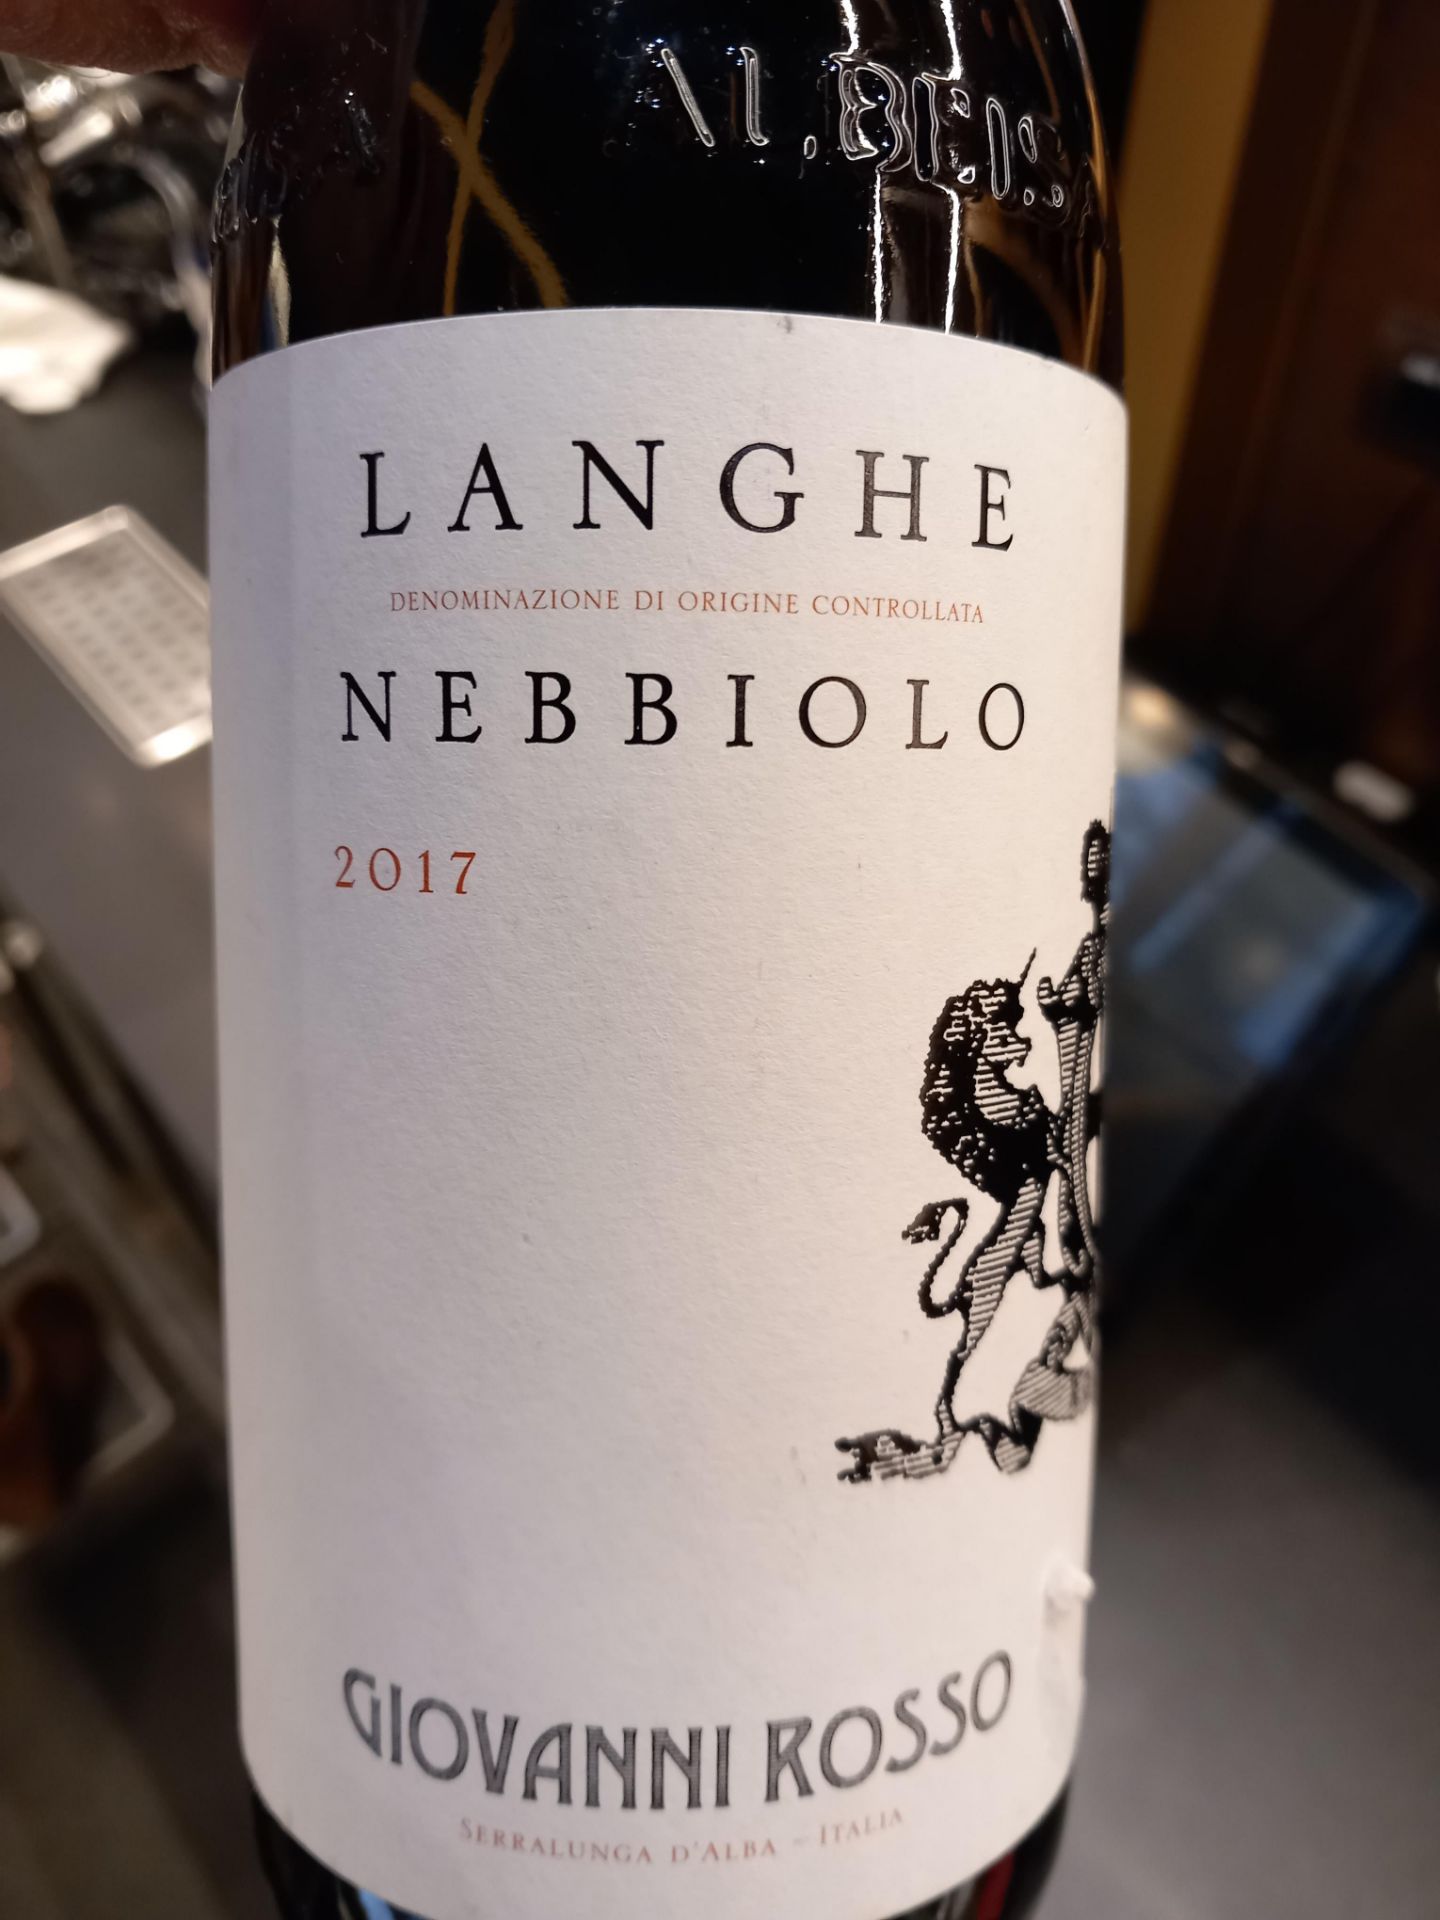 21x Langhe Nebbiolo 2017 - Image 4 of 4